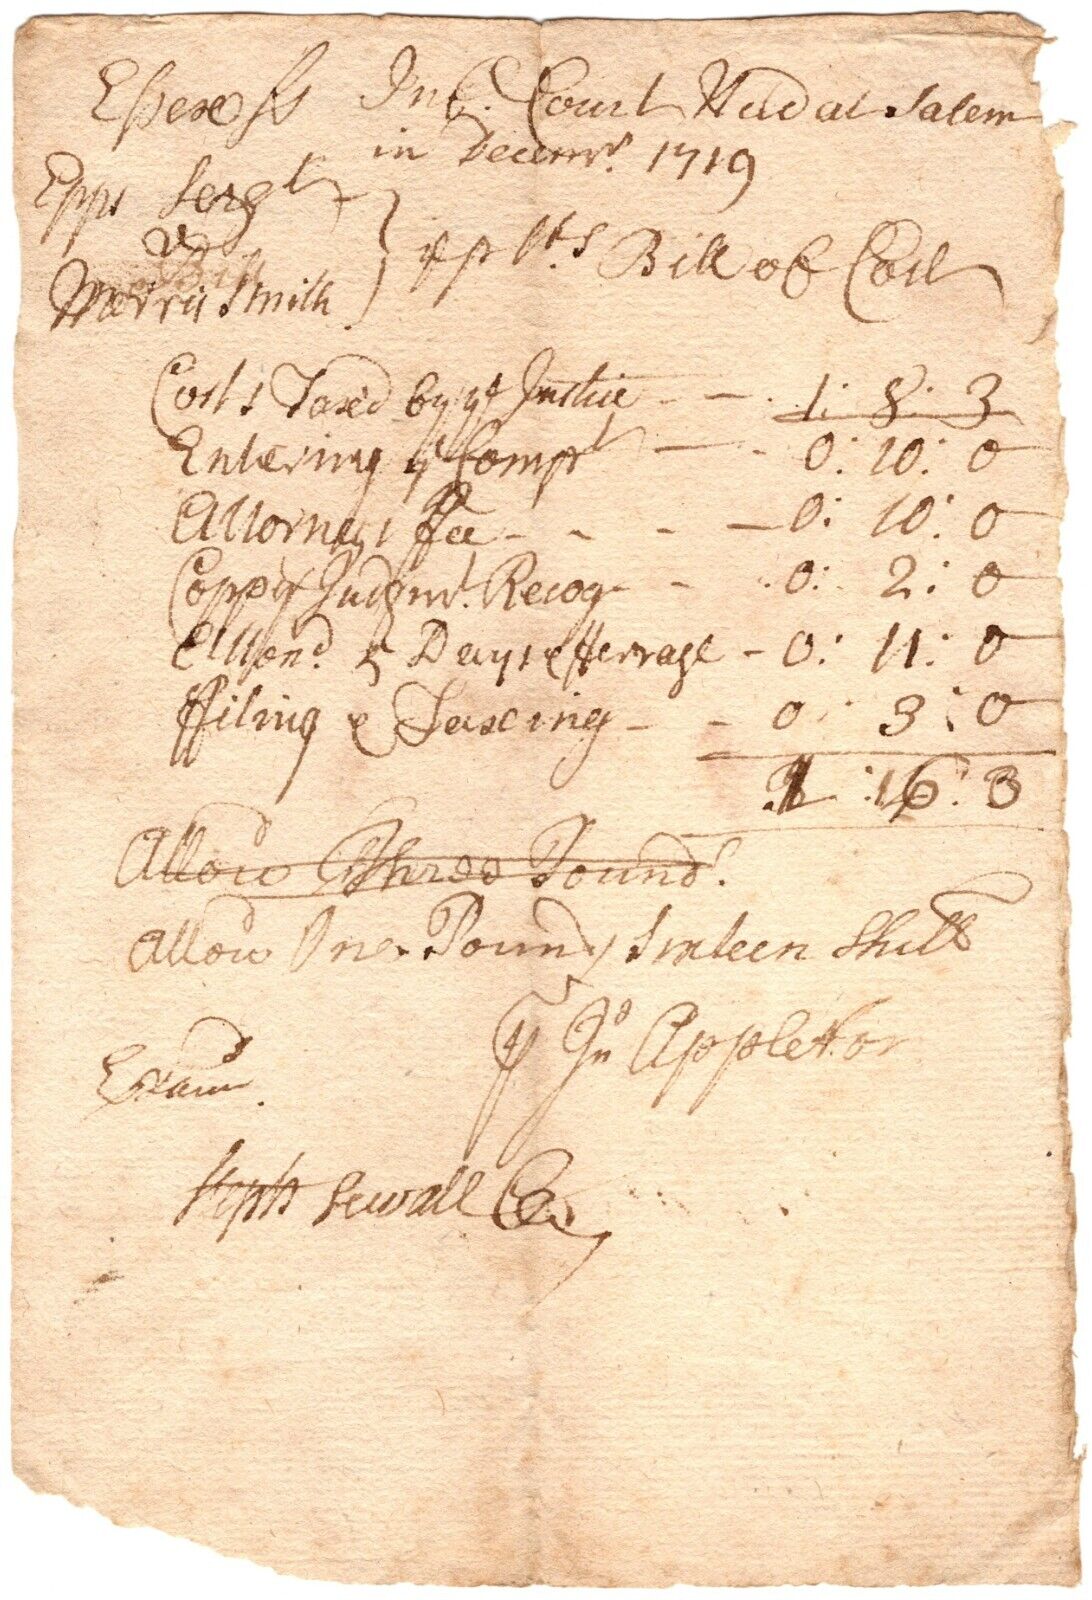 Stephen Sewall - Document Signed - Court Clerk of Salem Witch Trials of 1692